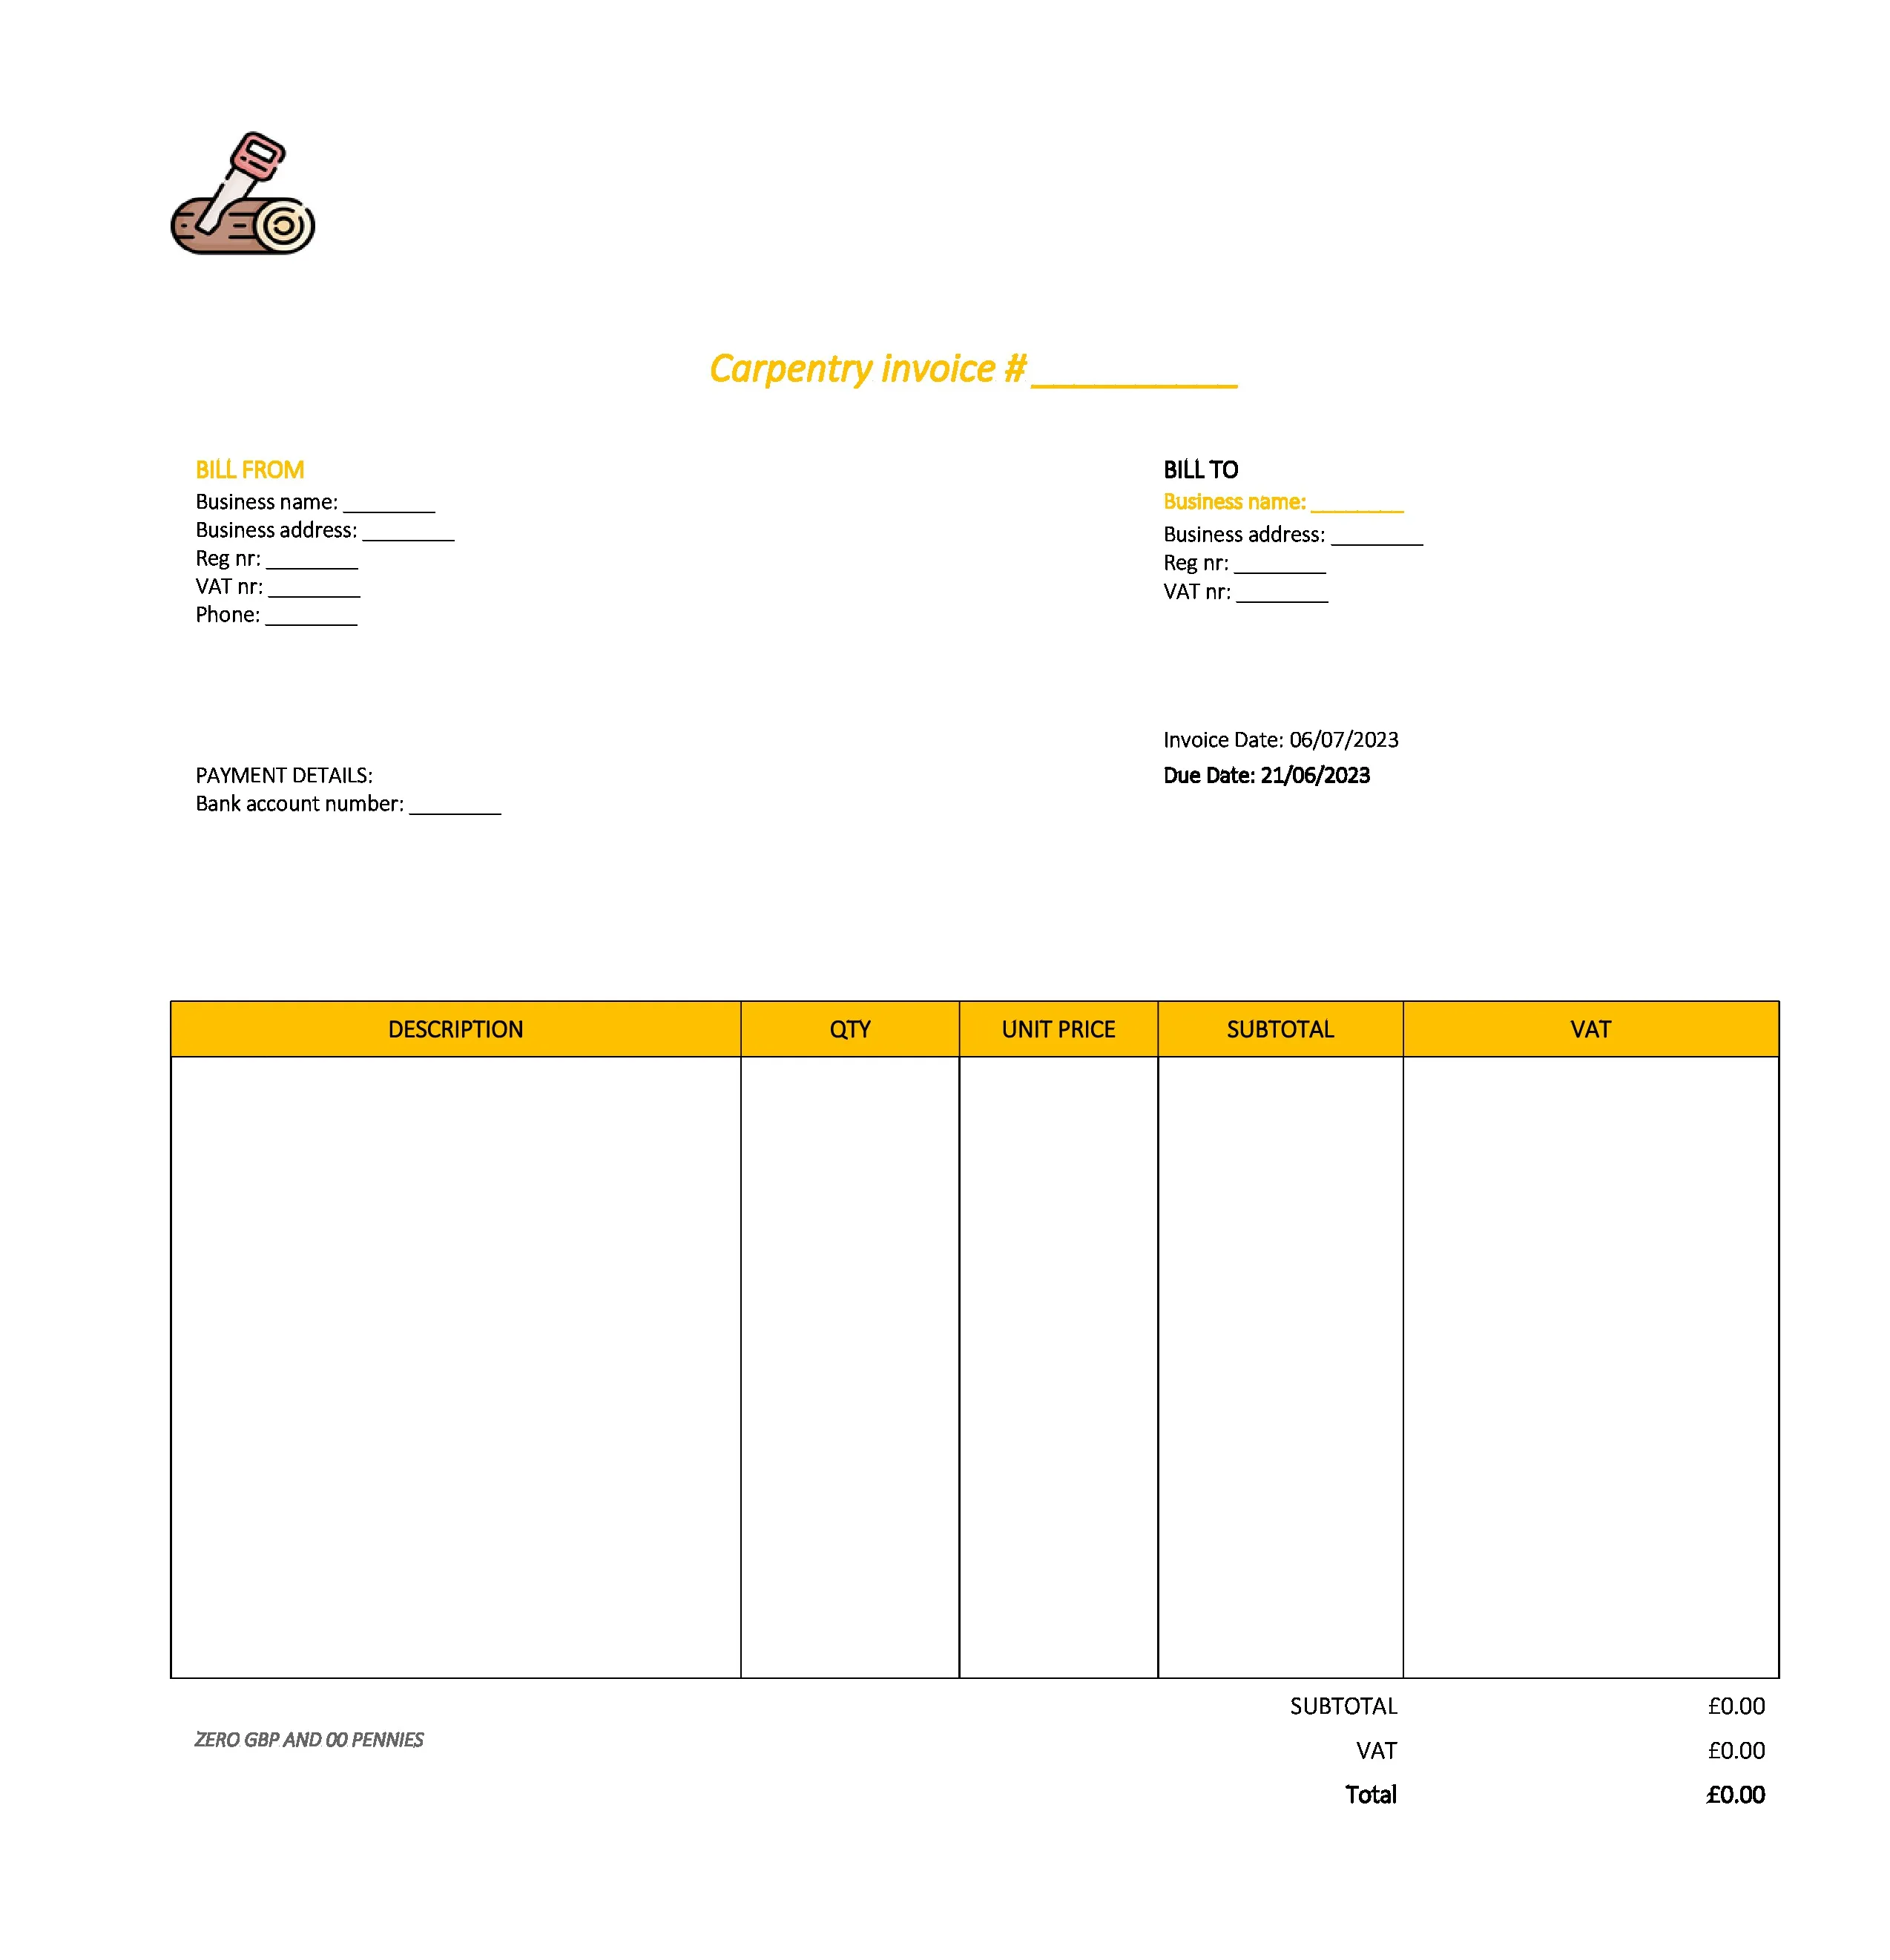 draft carpentry invoice template UK Excel / Google sheets